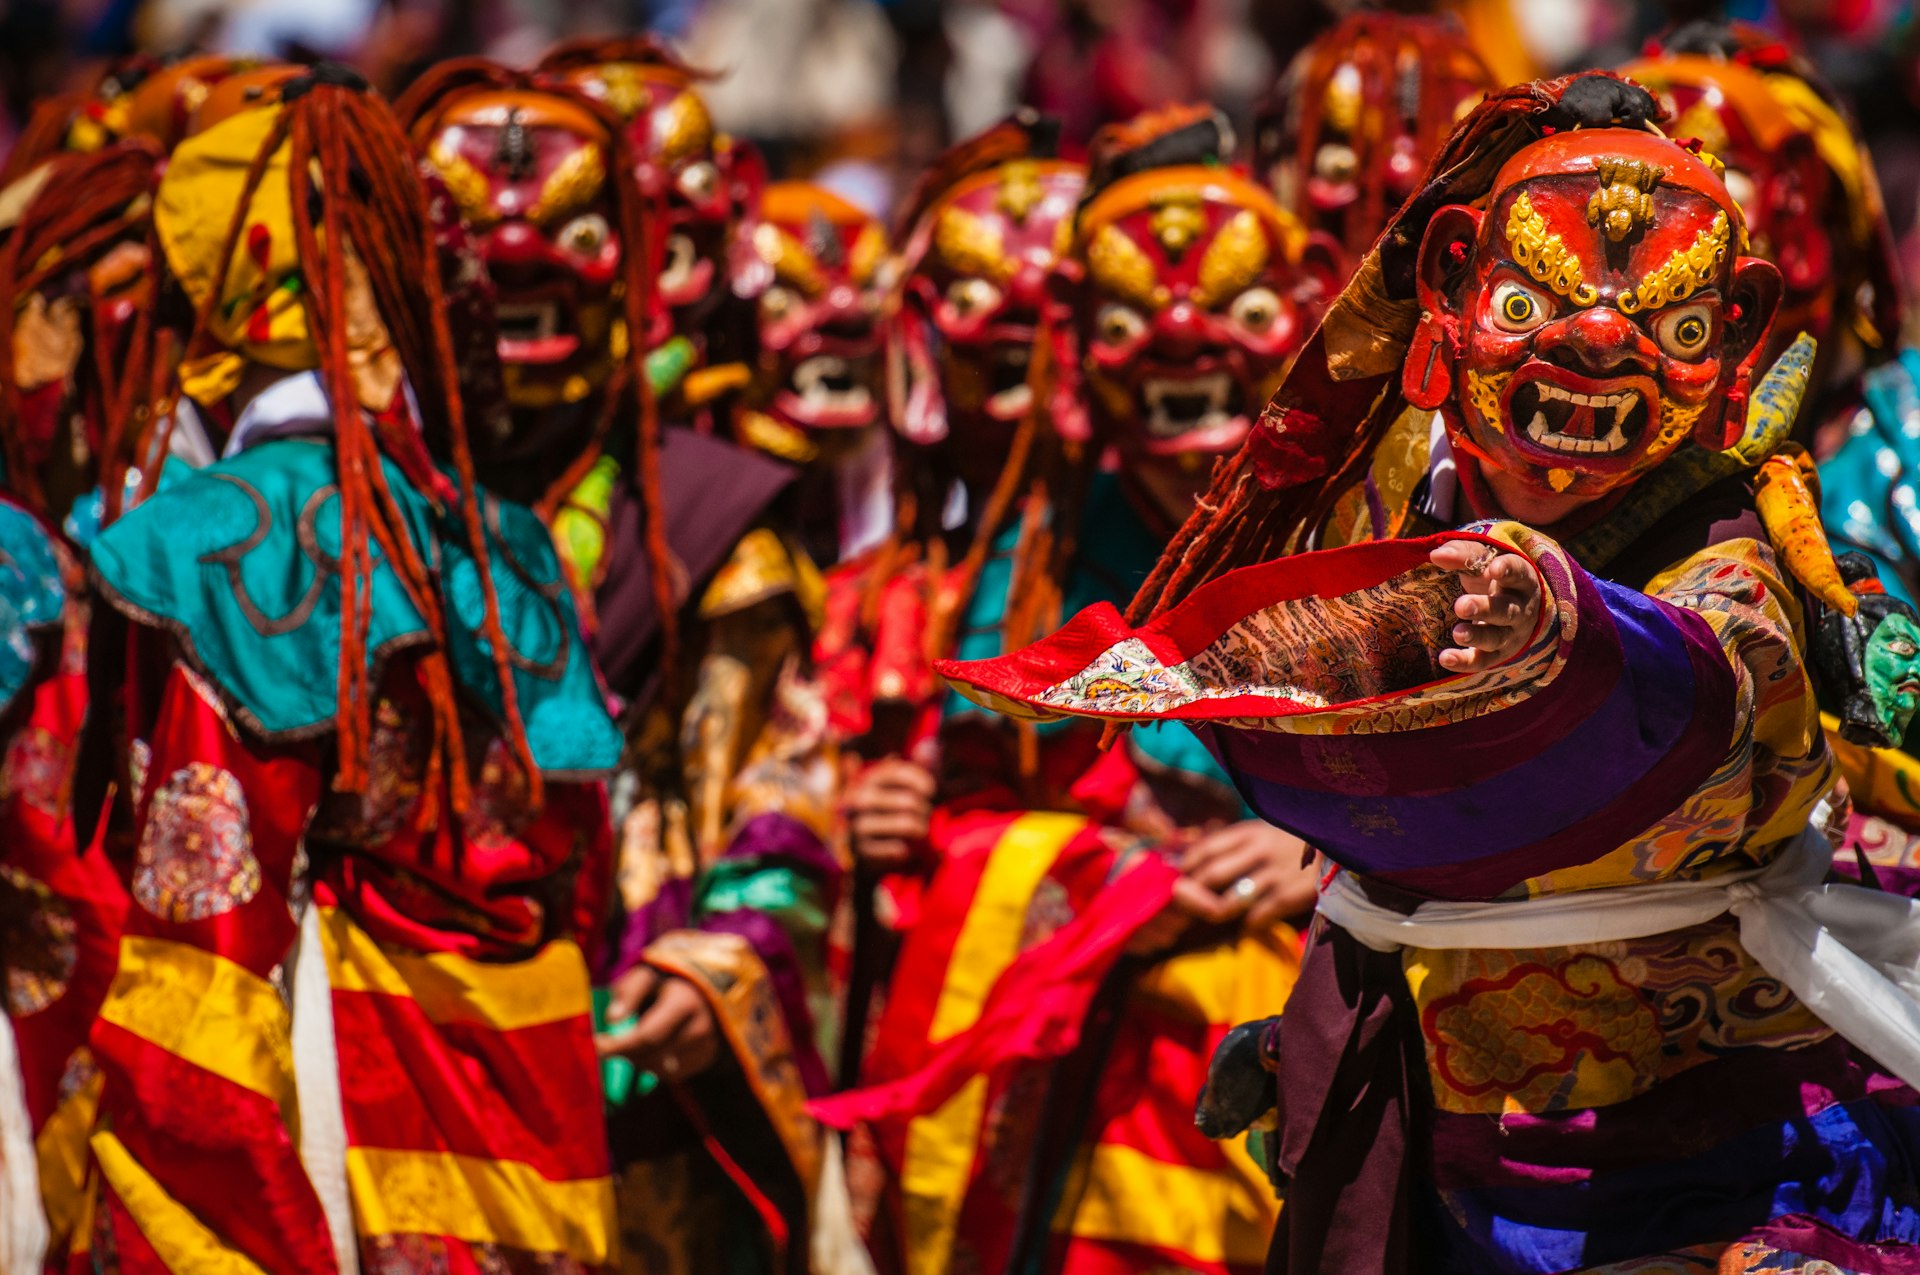 Masked performers participate in the tsholing dance at Paro Dzong, Bhutan